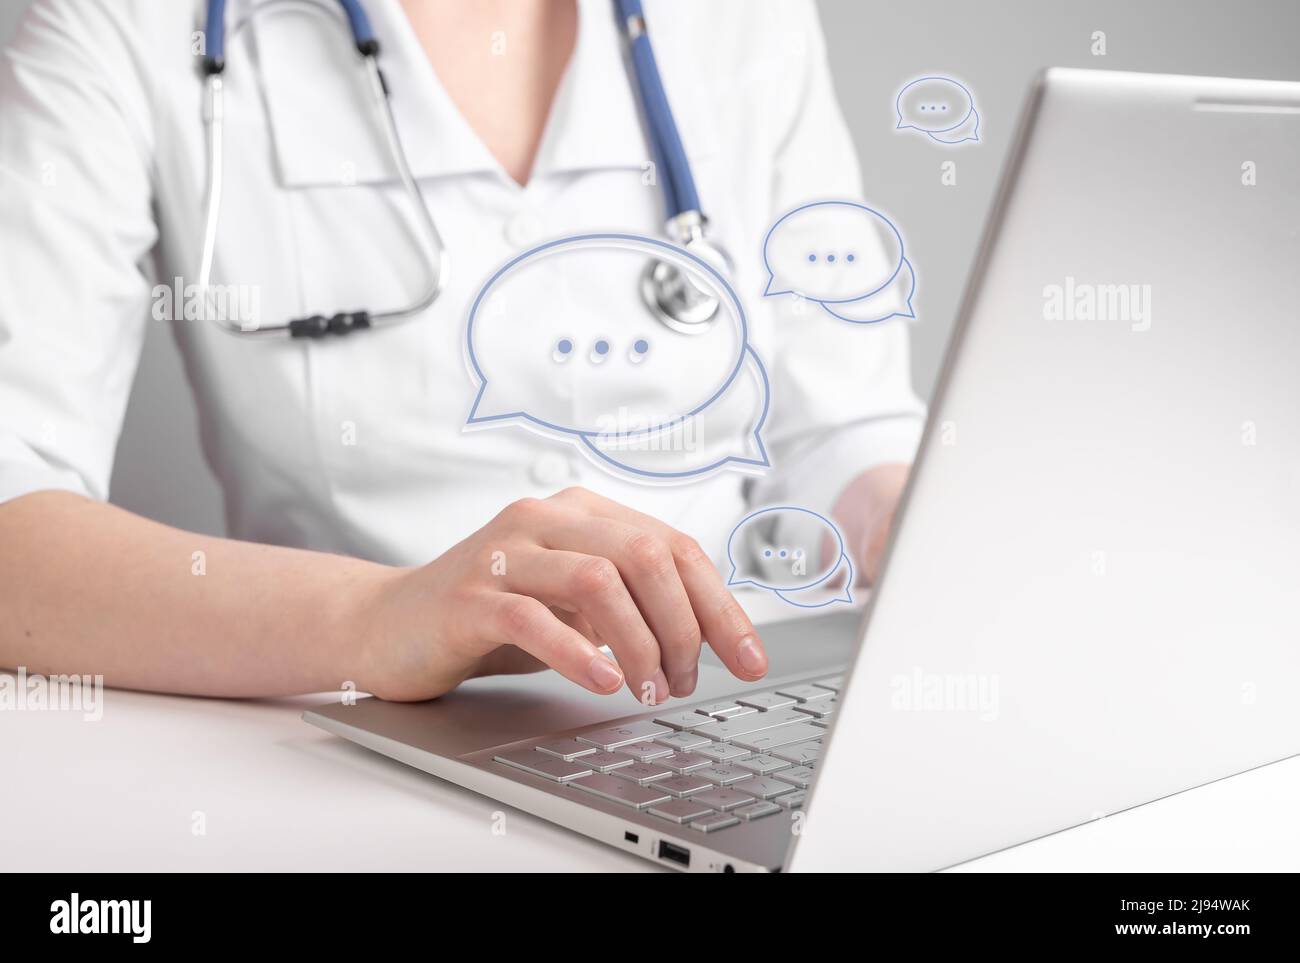 Online medical consultation. Doctor using laptop for chatting with patients remotely and giving answers about general health concerns. Woman with stethoscope sitting at table with computer. photo Stock Photo